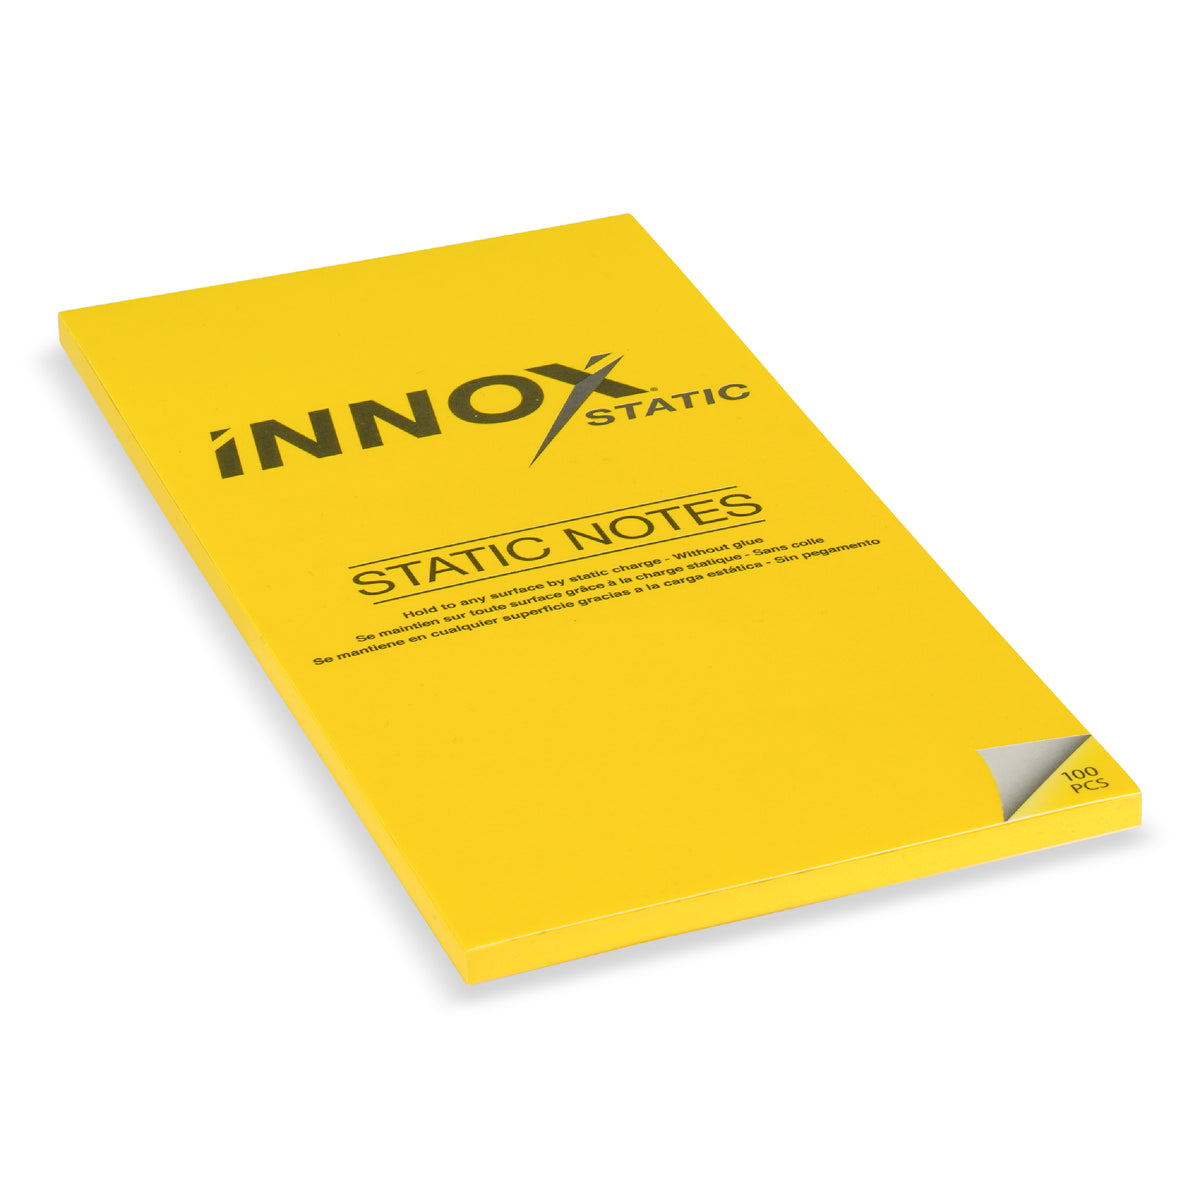 Notes-3-Sizes-6 colours-100-sheets/pack - innoXstatic.com